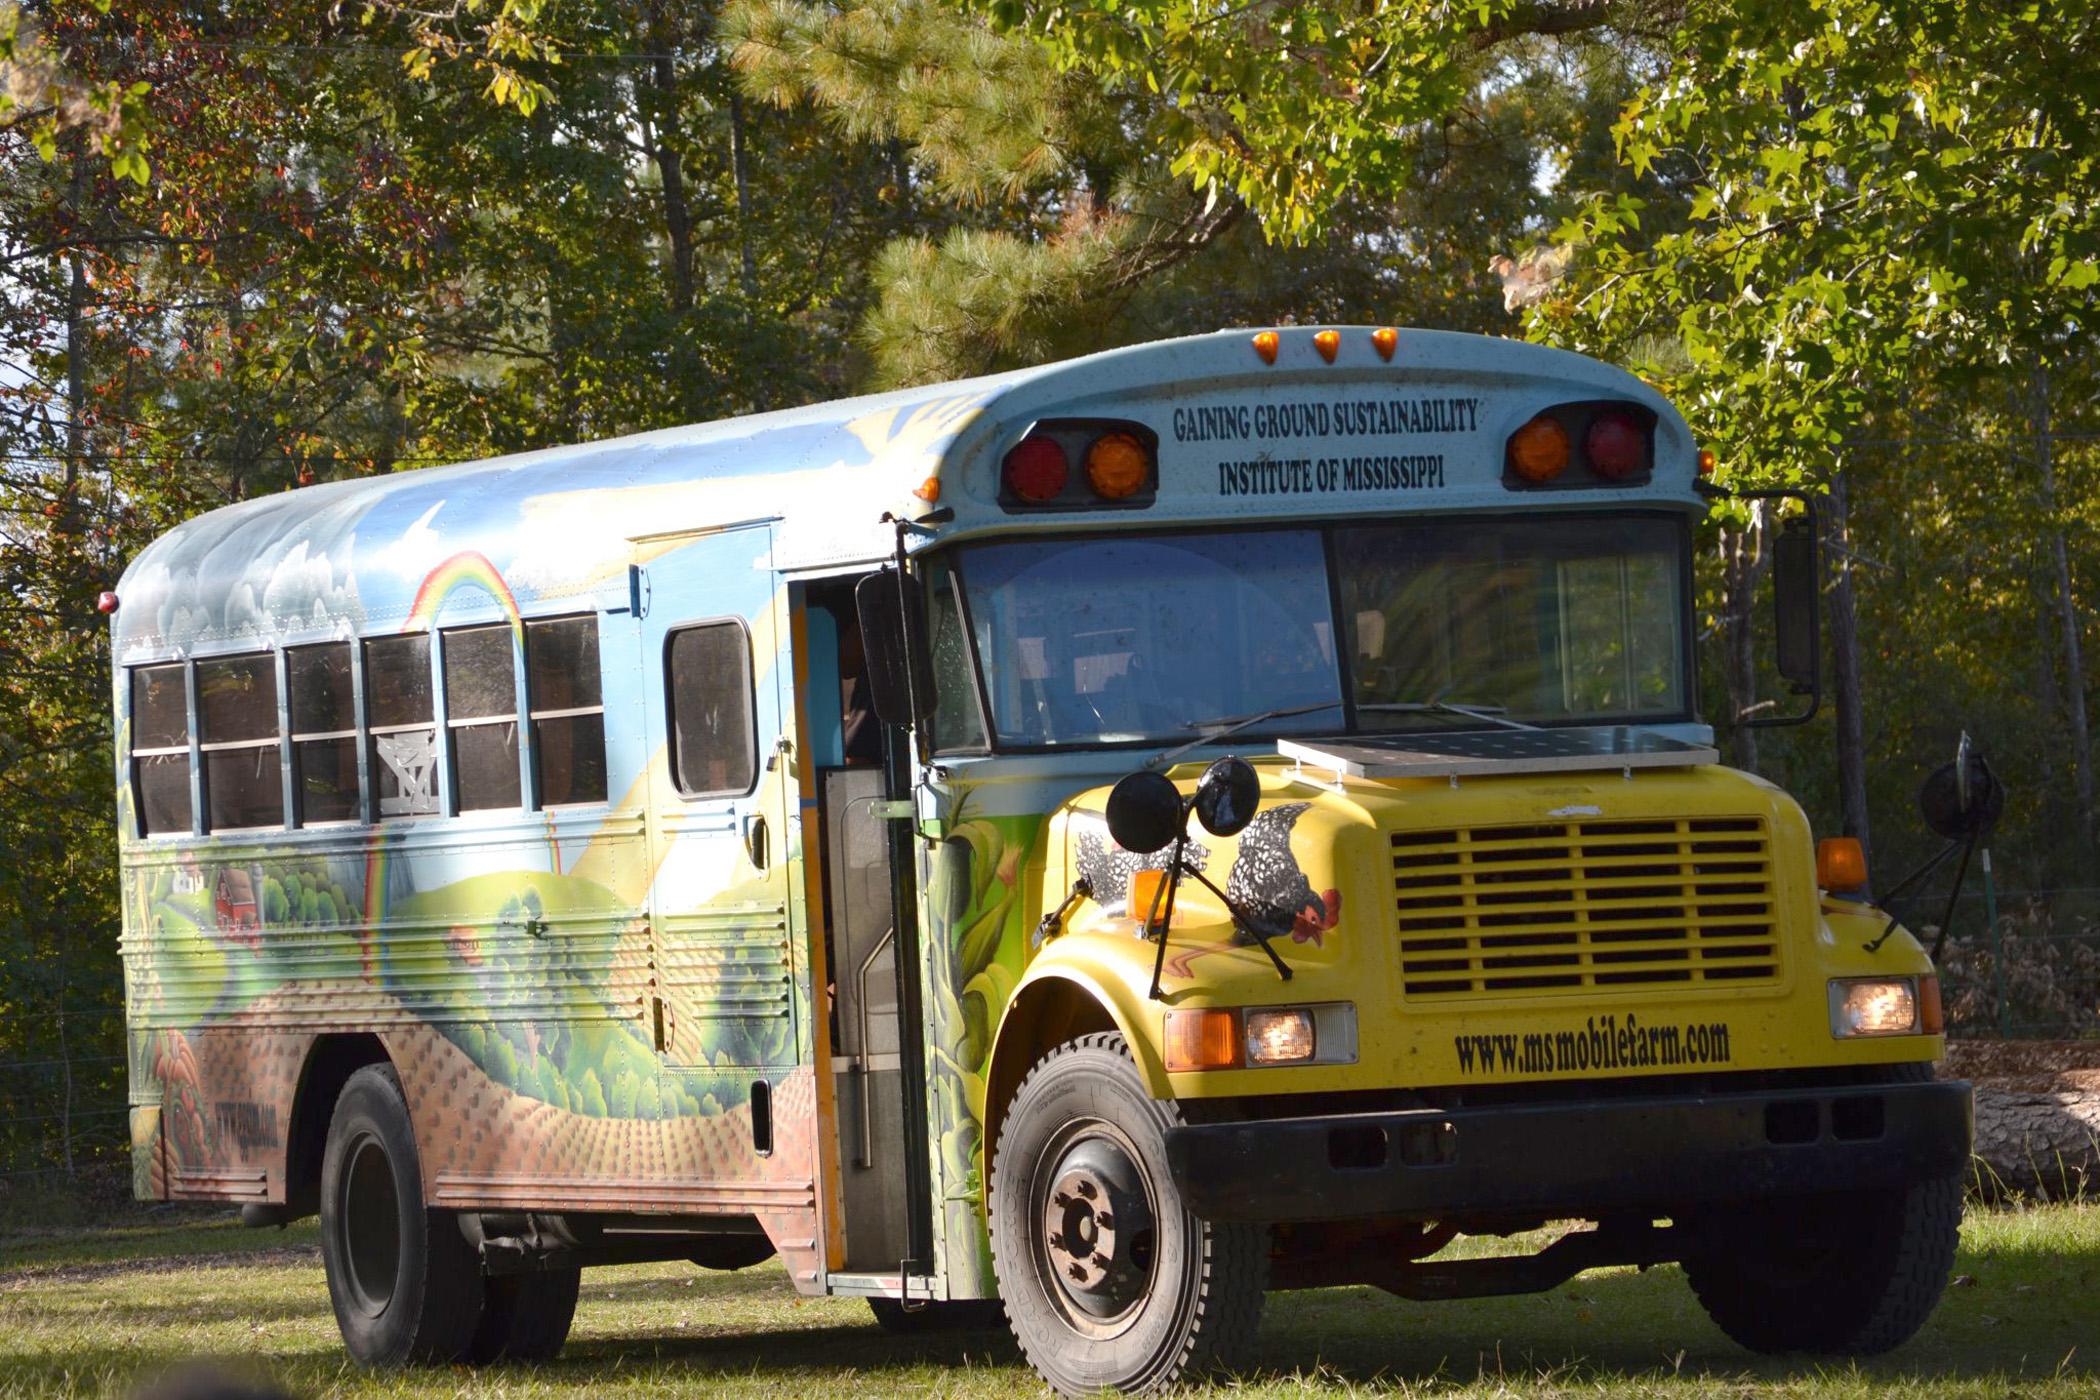 The Gaining Ground Sustainability Institute of Mississippi uses a mobile farm to take examples of renewable energy and food production strategies to schools around the state. (Submitted Photo)"